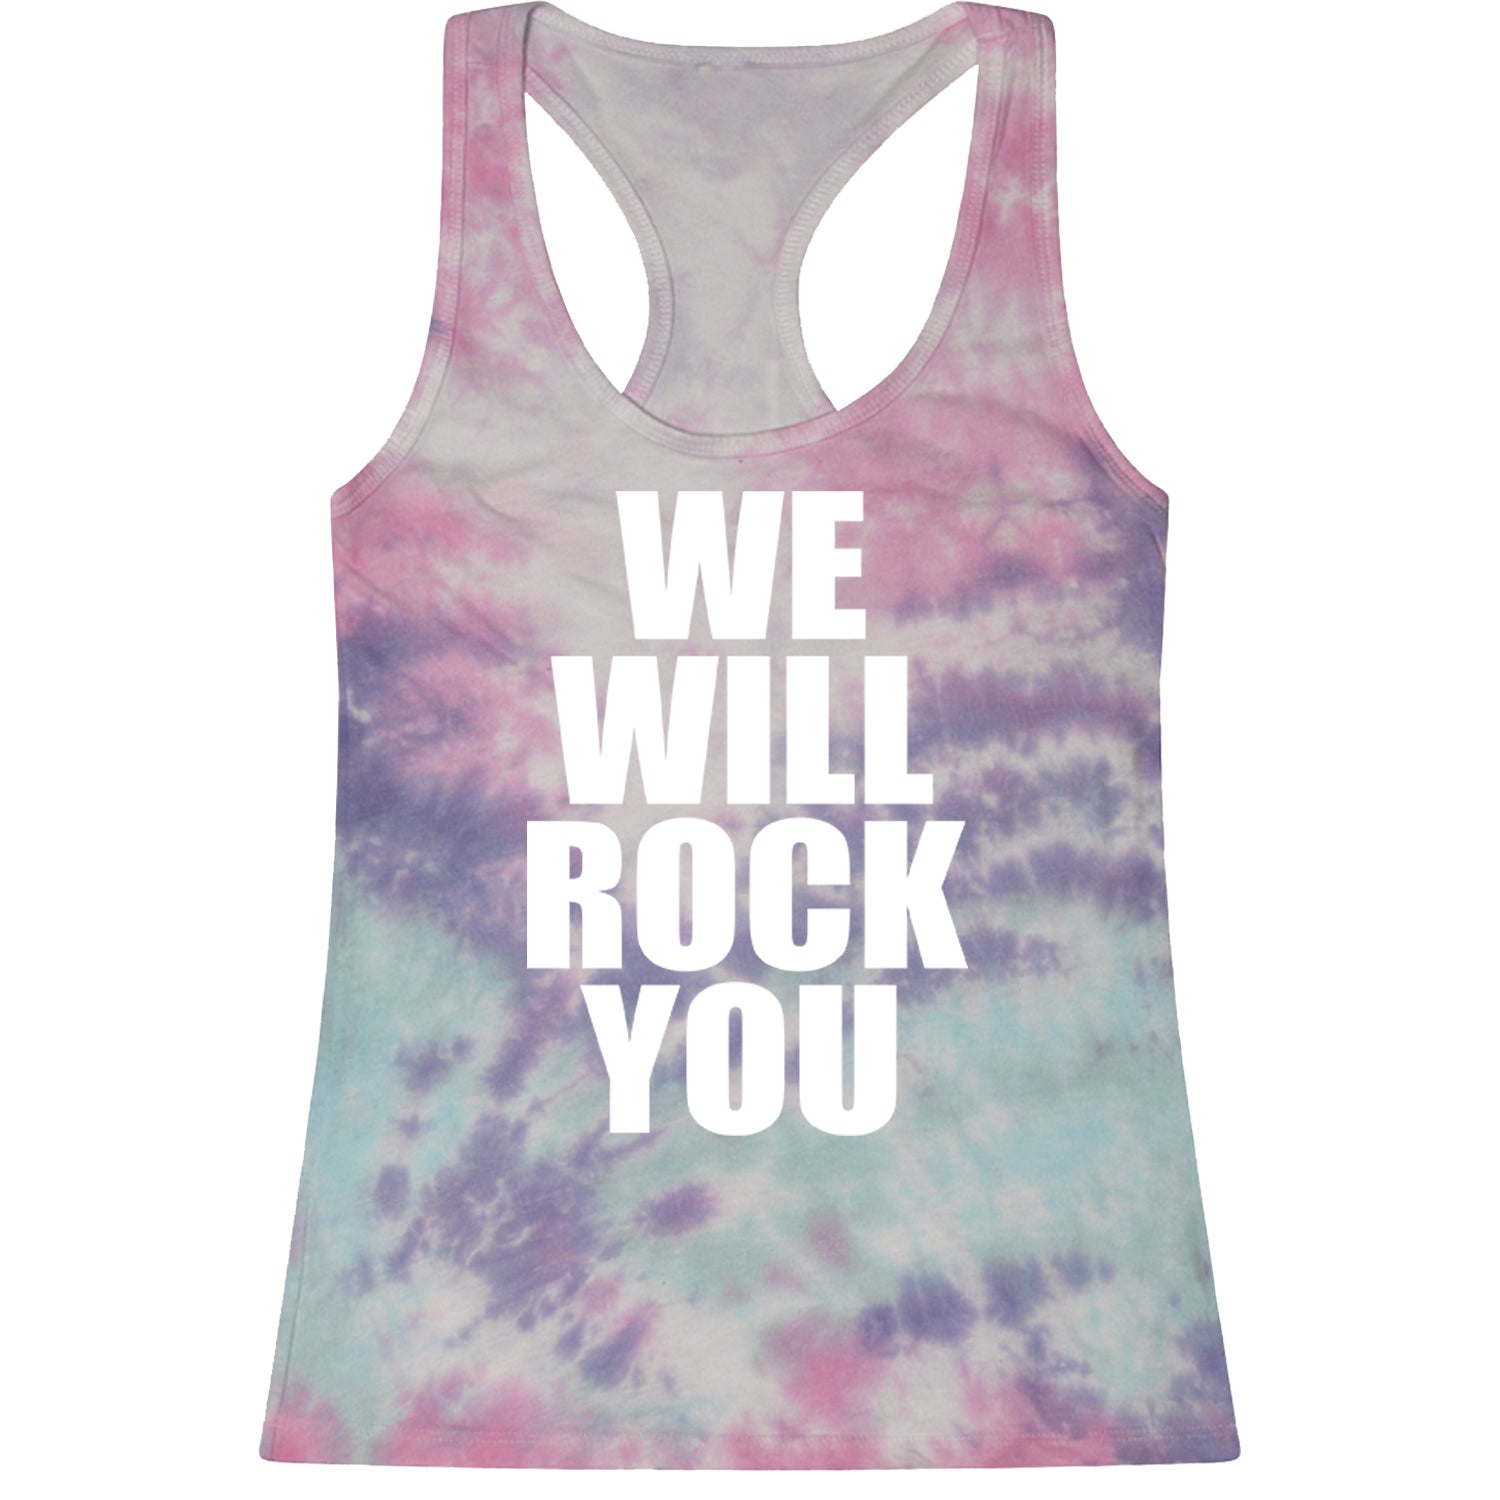 We Will Rock You Racerback Tank Top for Women #expressiontees by Expression Tees